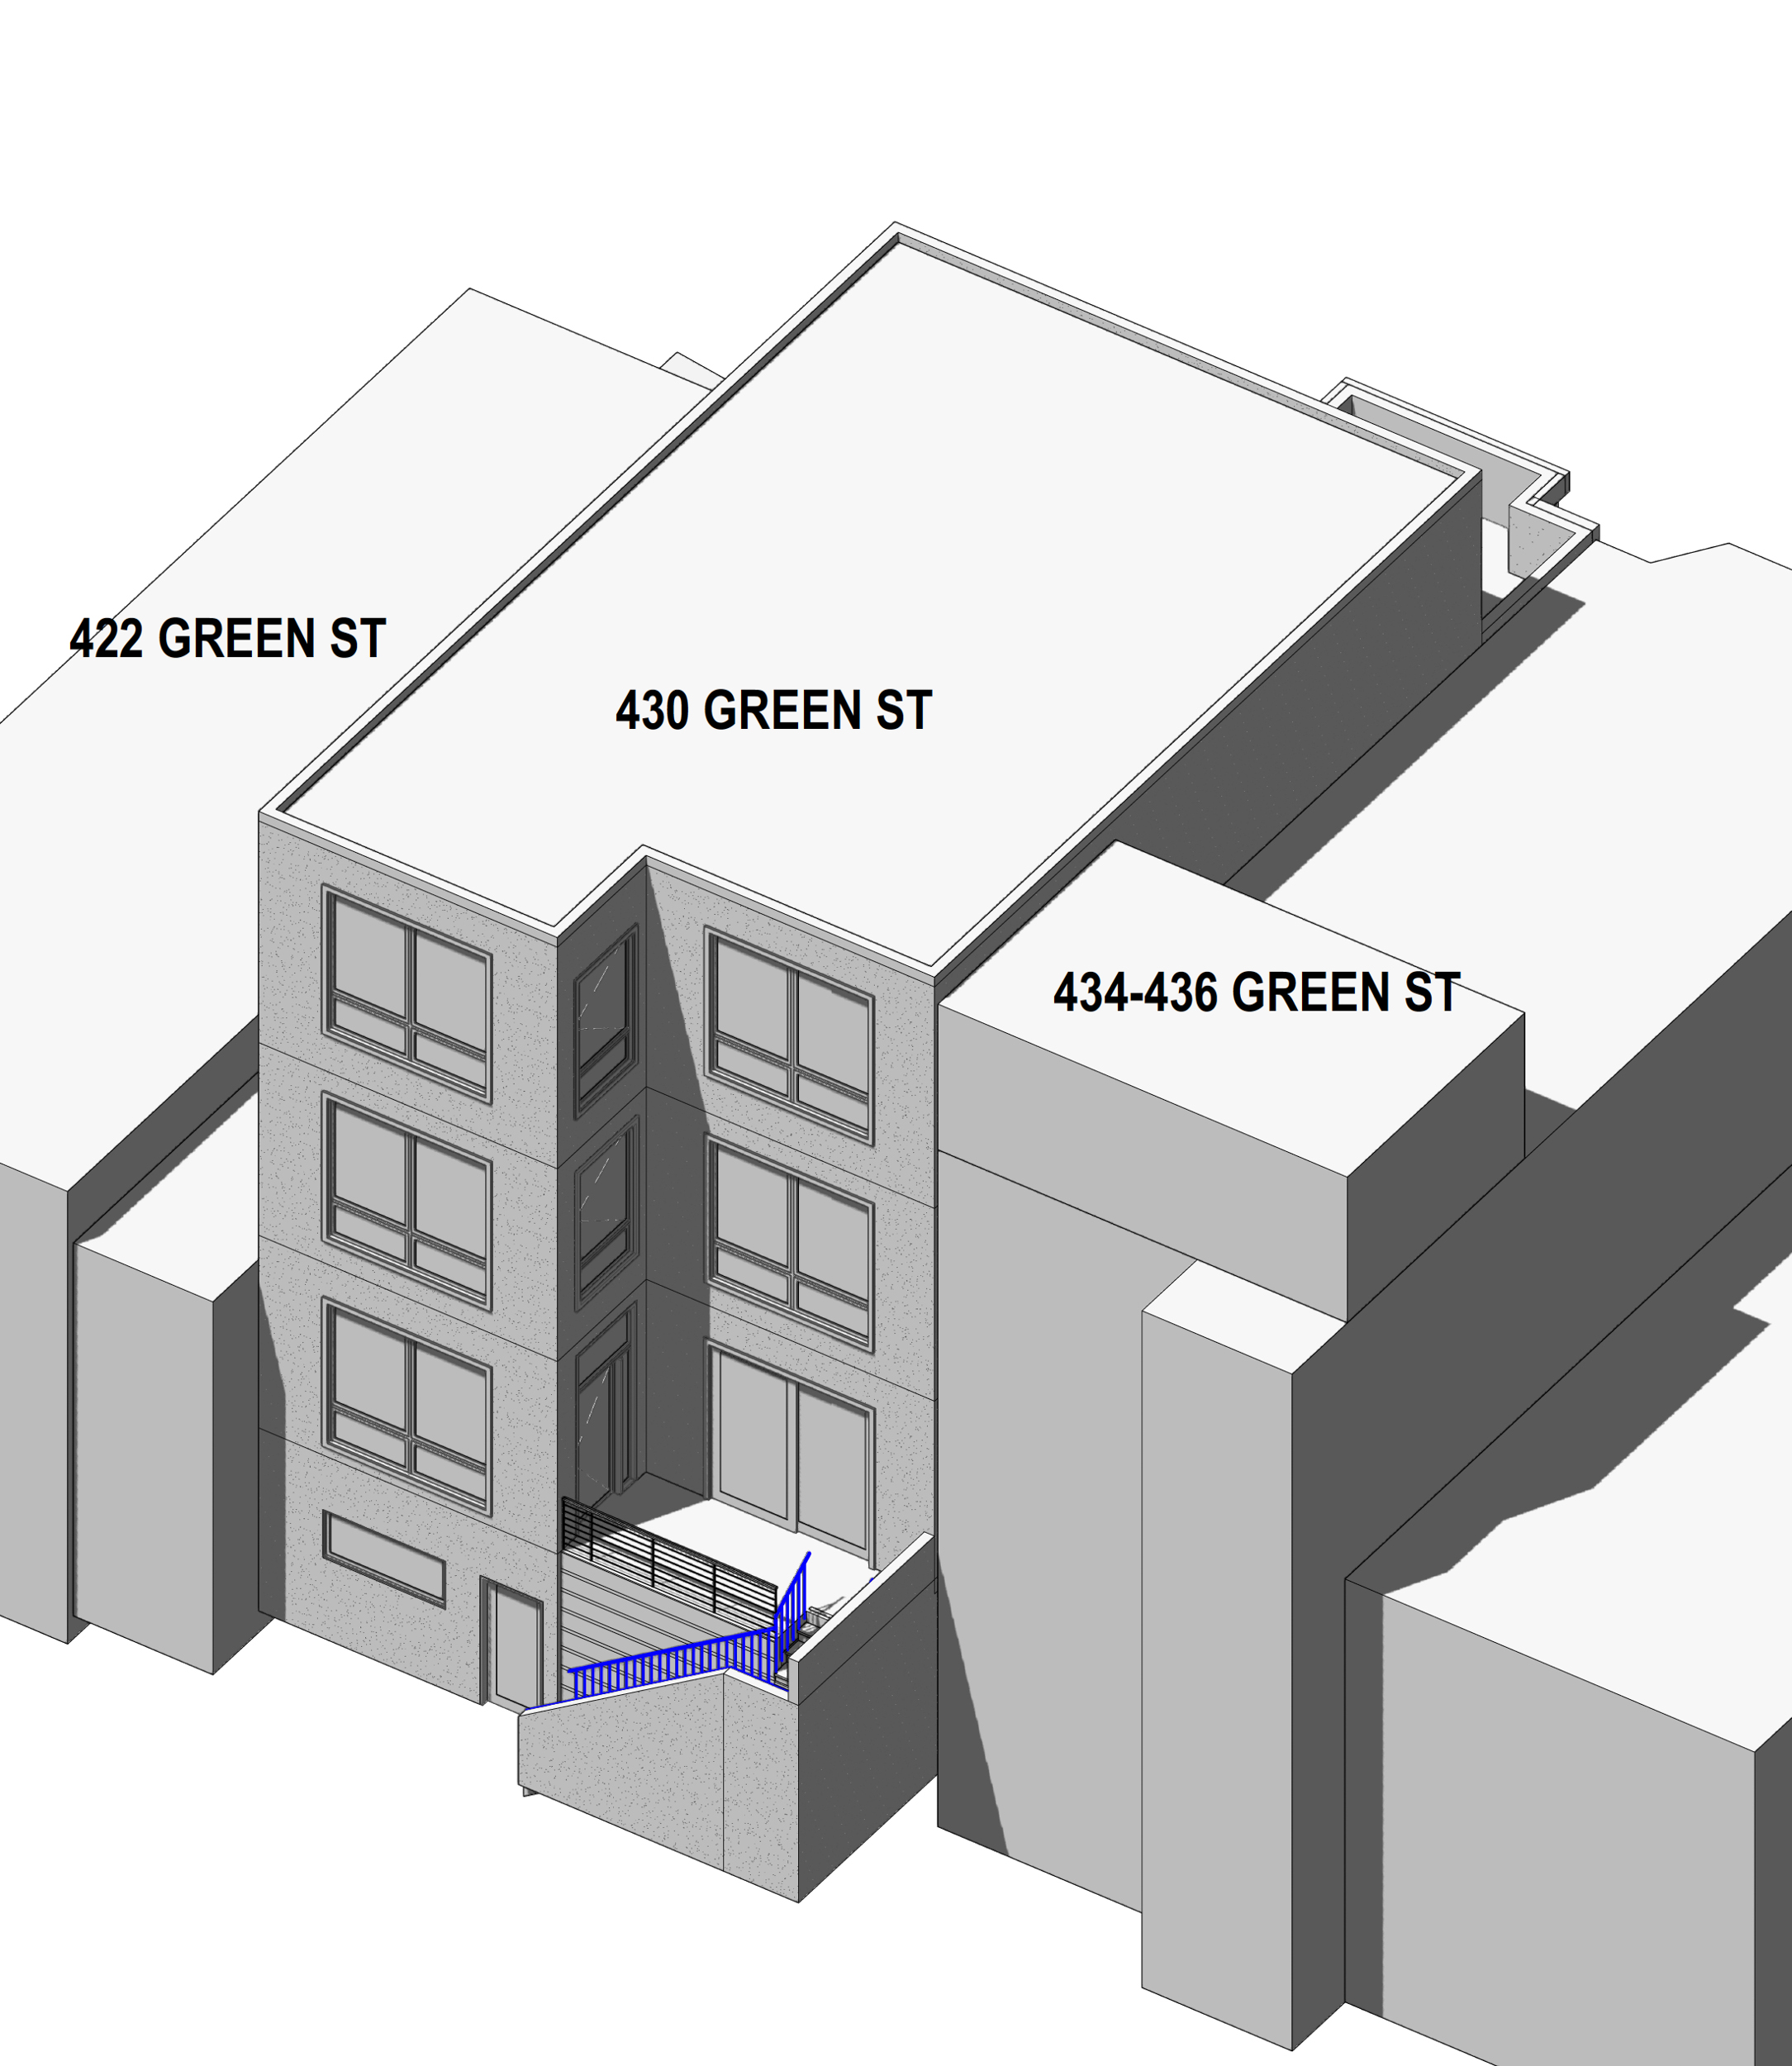 430 Green Street rear view, illustration by SIA Consulting